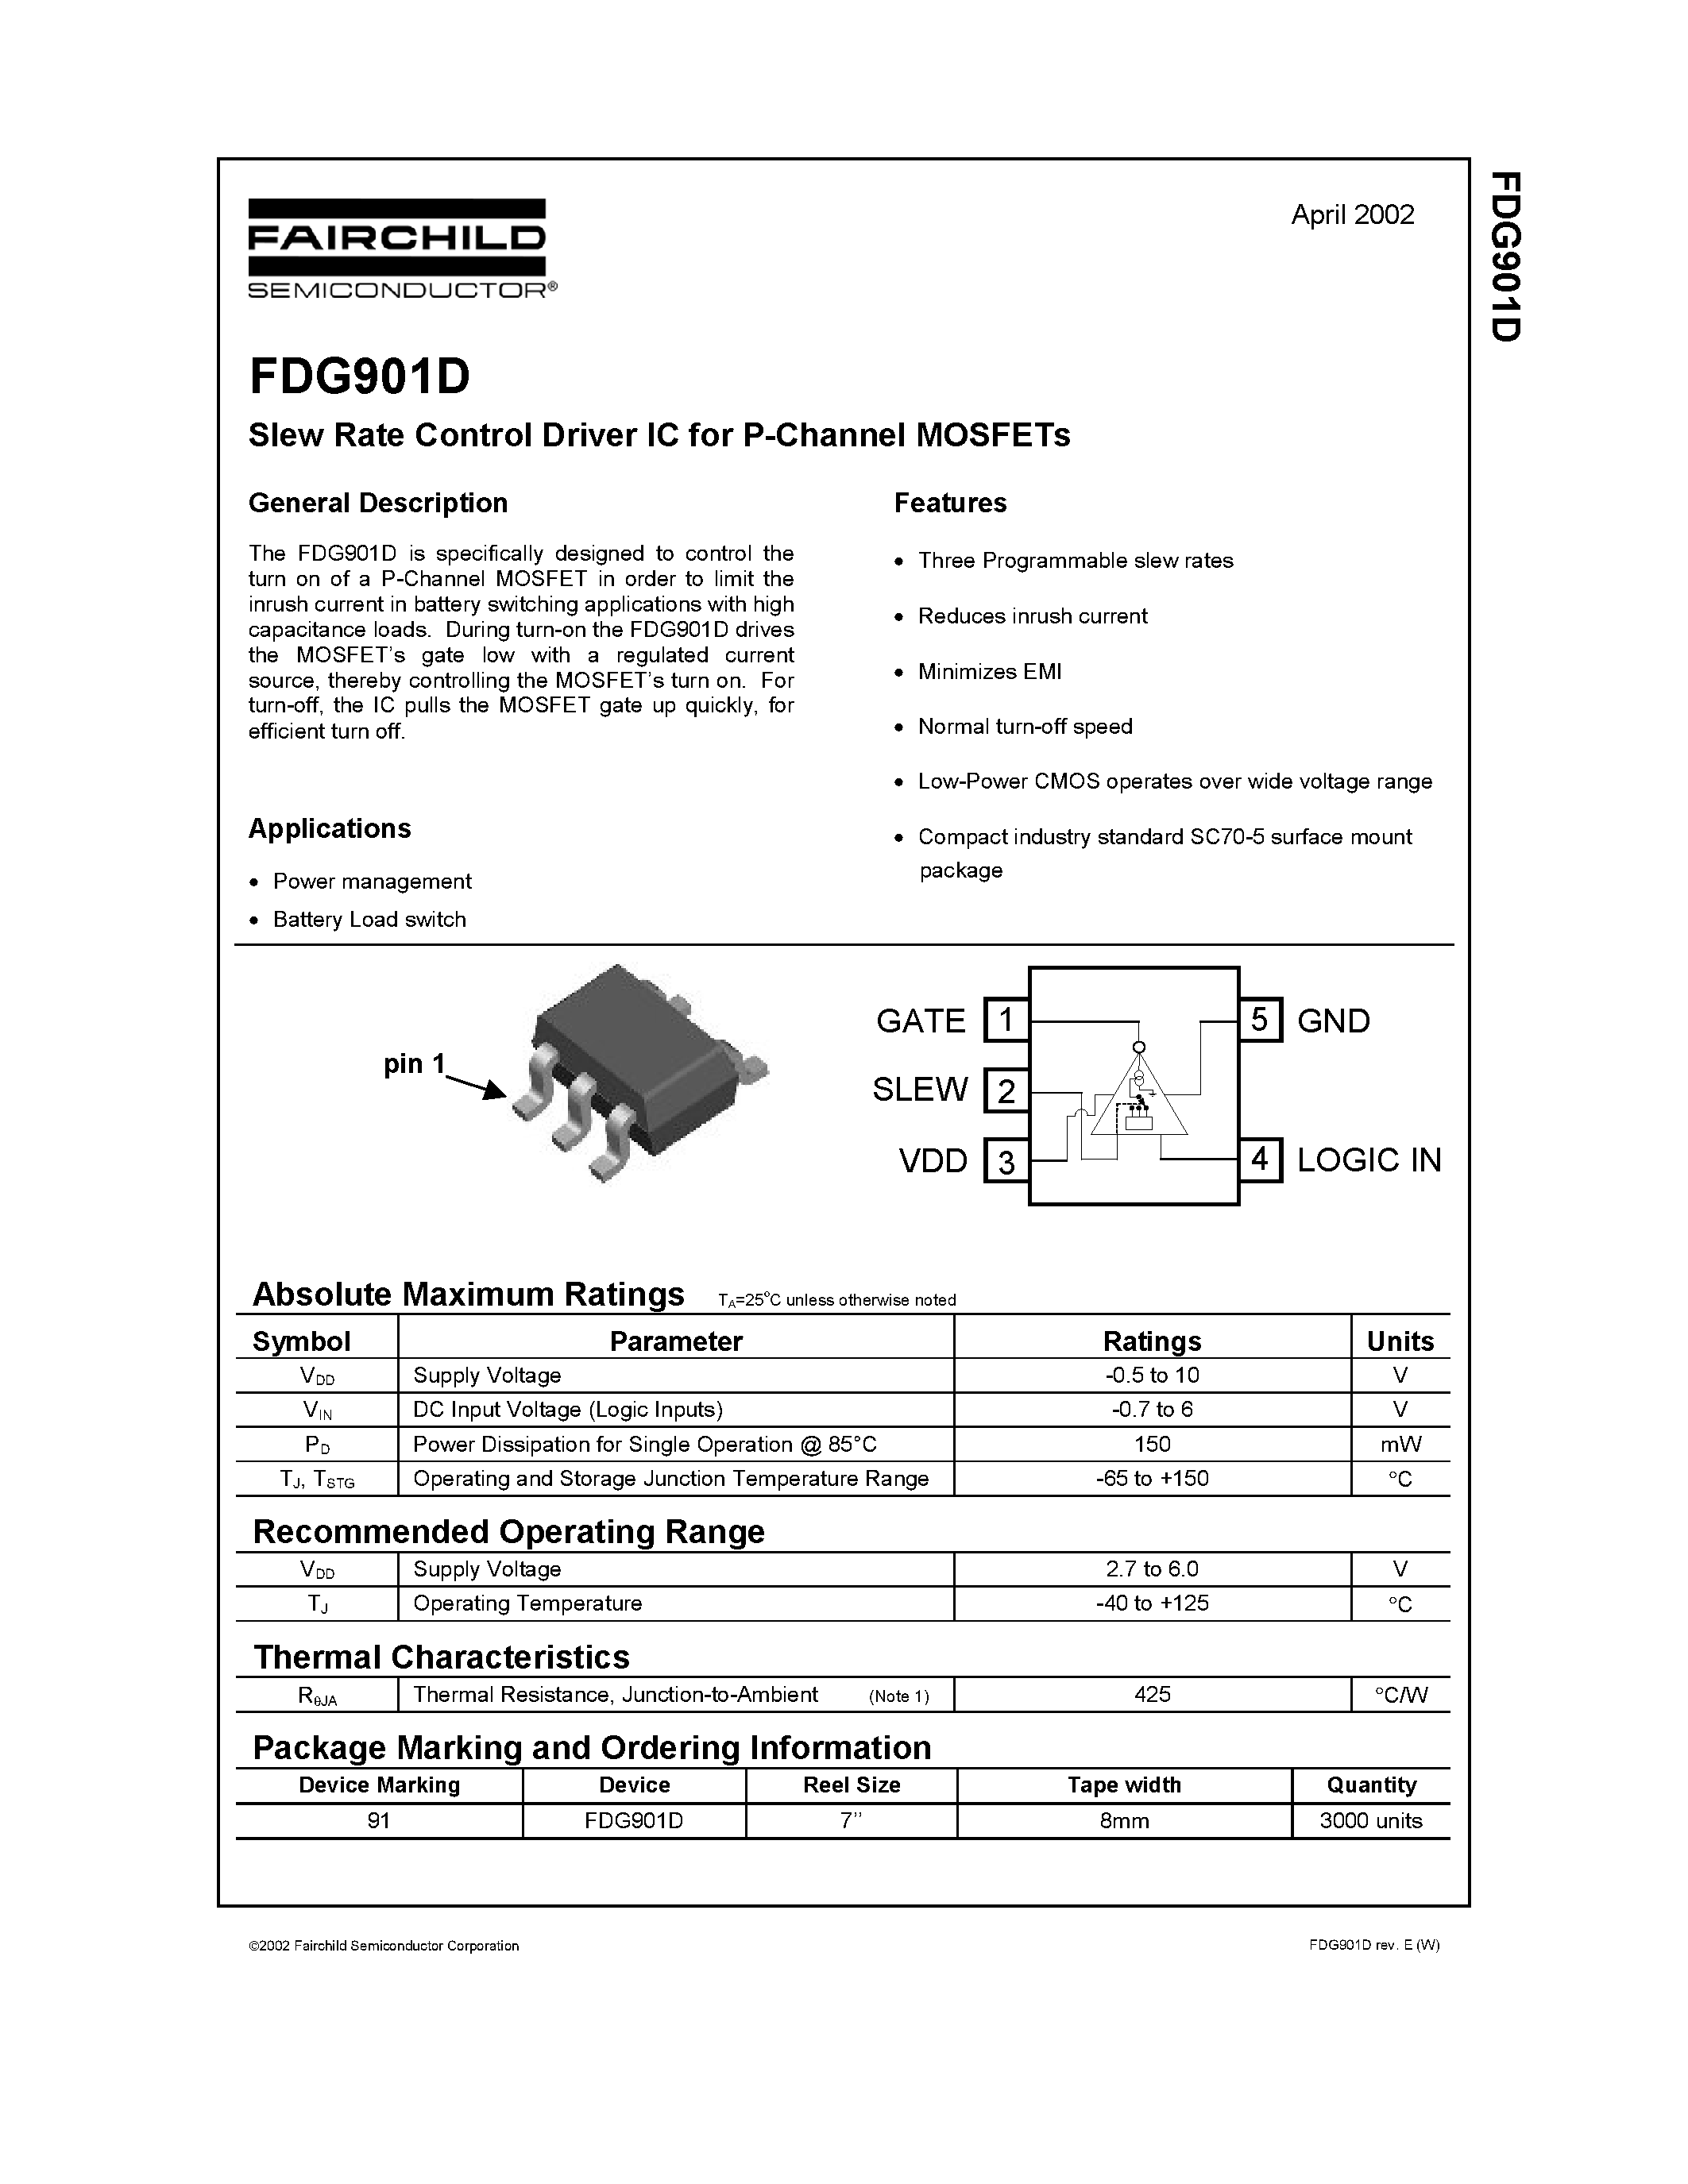 Datasheet FDG901D - Slew Rate Control Driver IC for P-Channel MOSFETs page 1